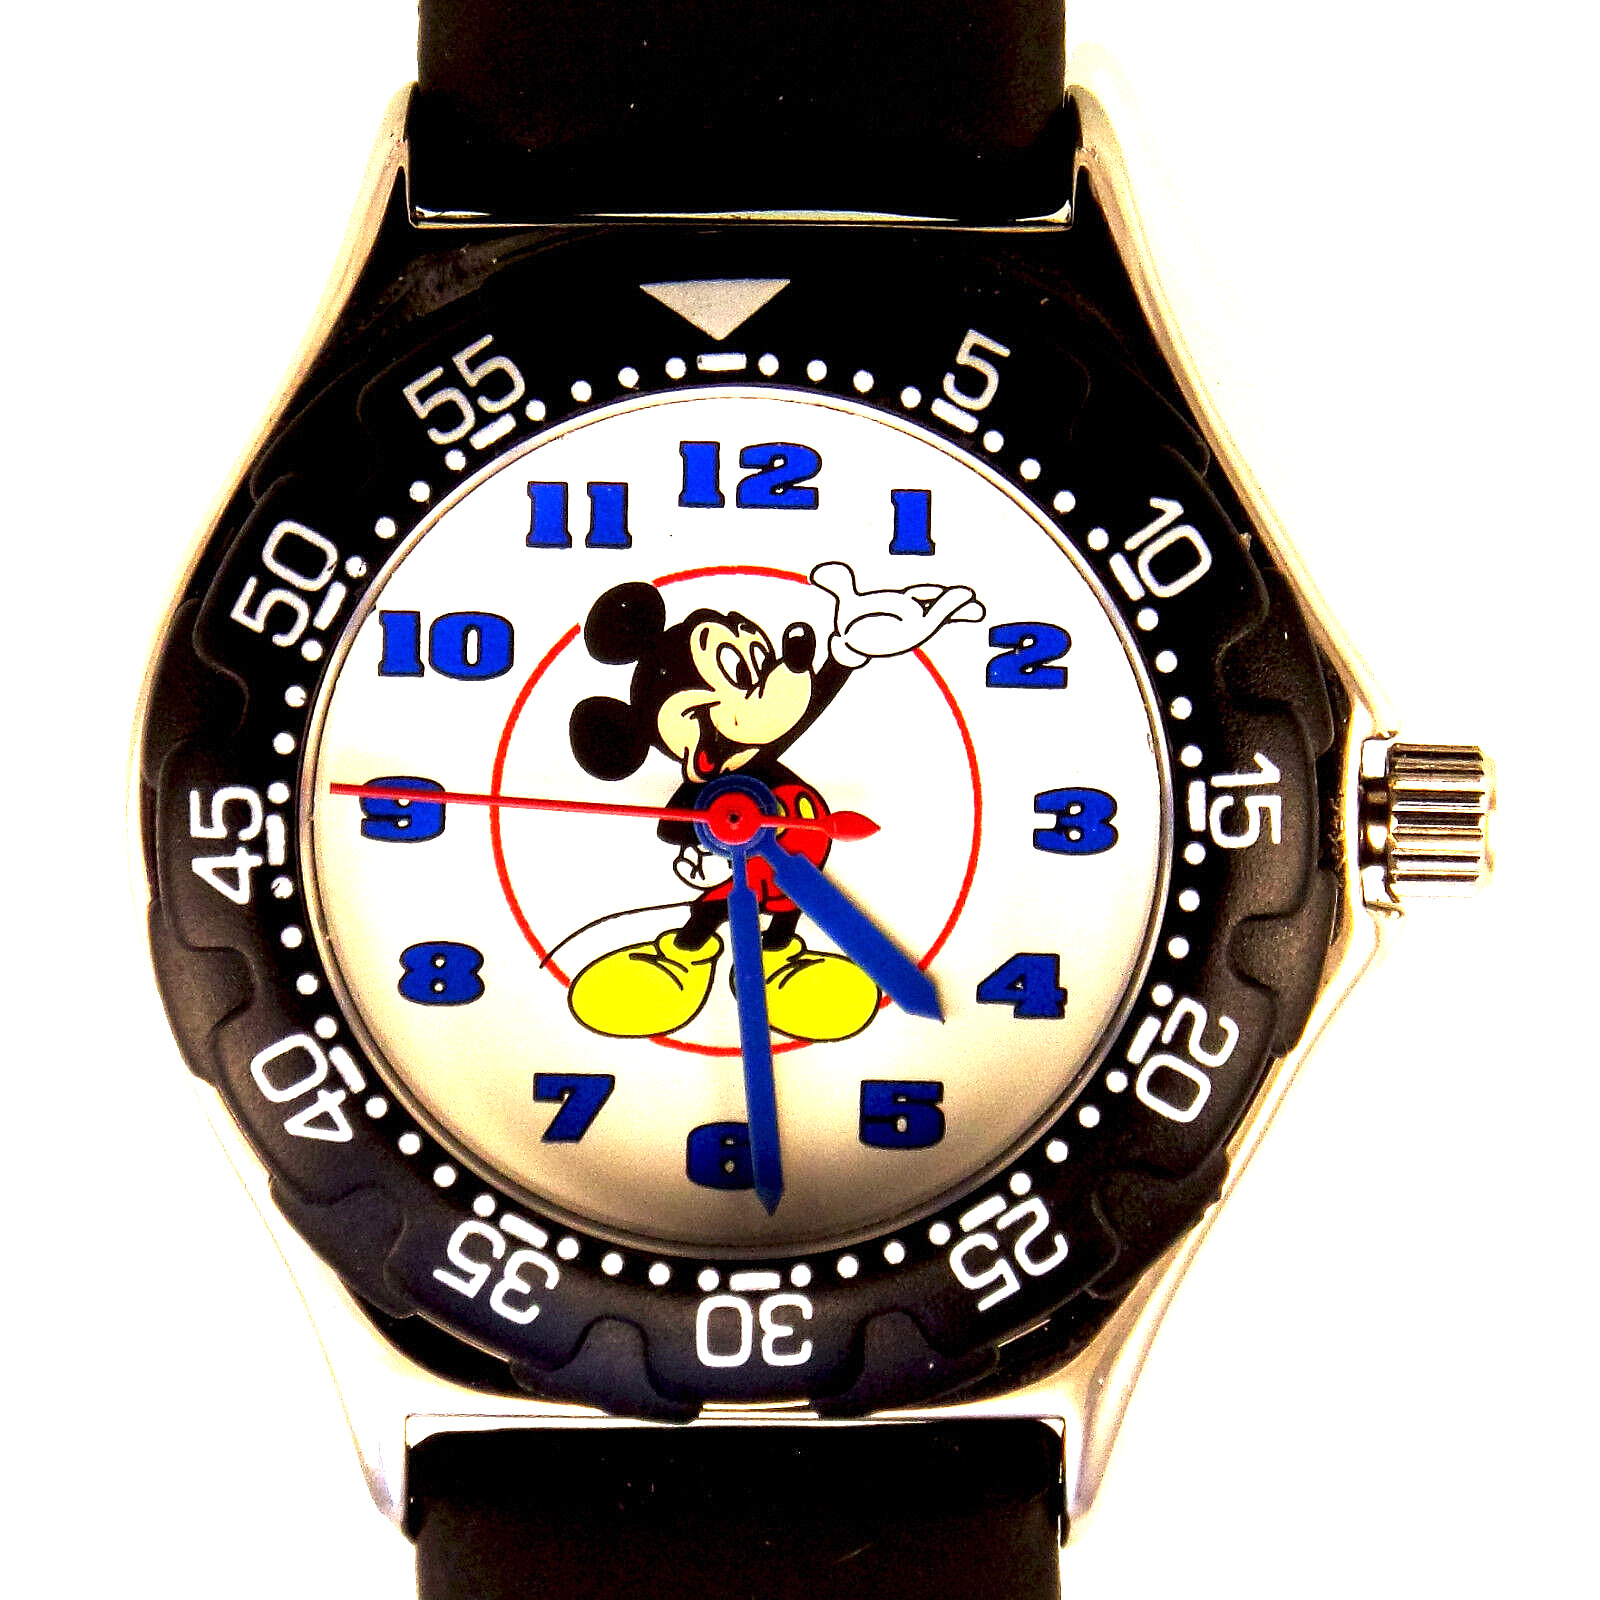 Mickey Mouse Disney Time Works Fossil Watch Easy Read Number Dial Diver Look $89